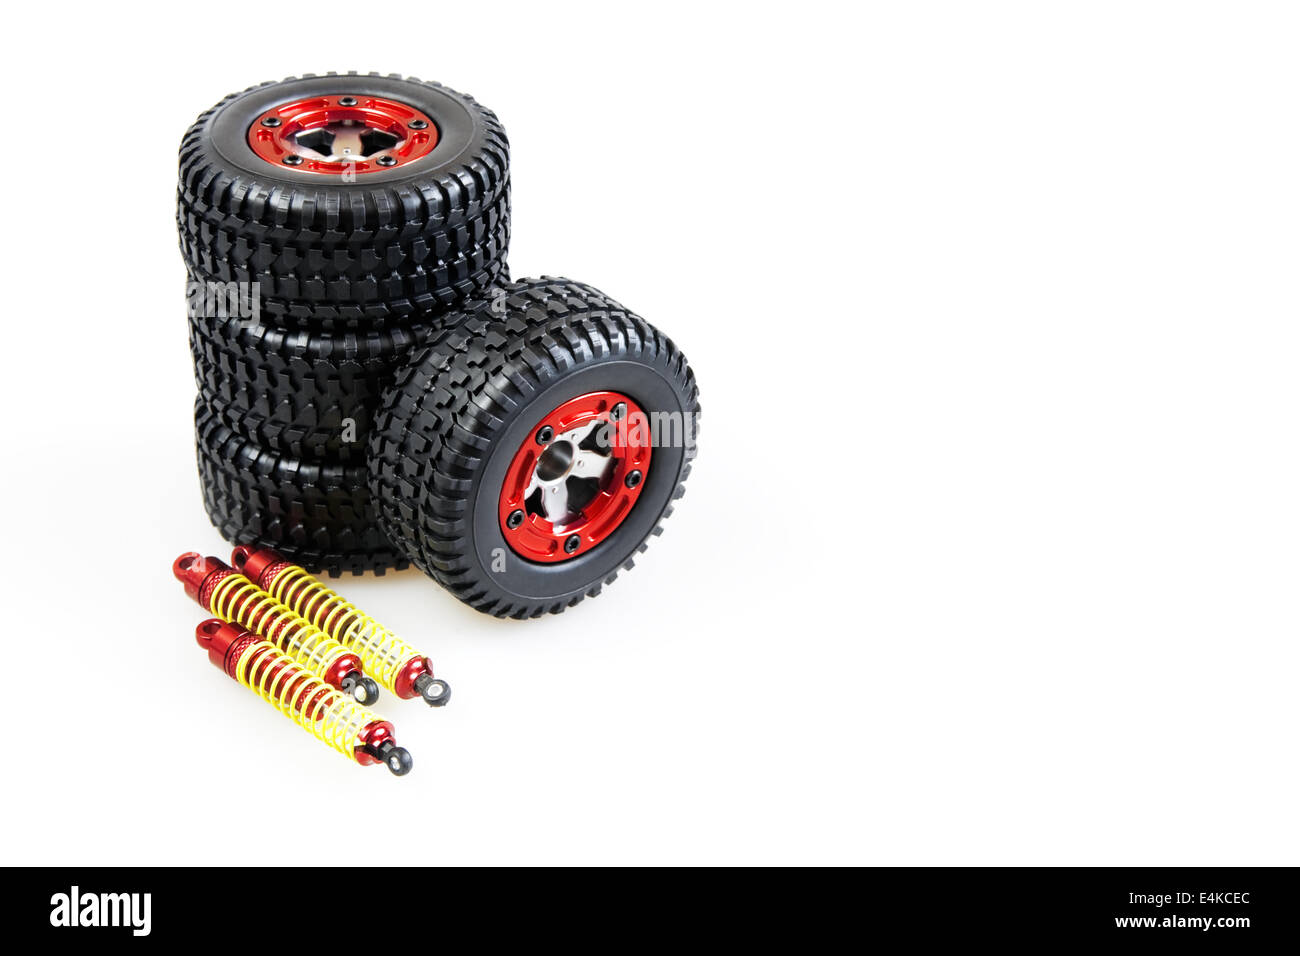 shock-absorbers and wheels of rc car Stock Photo